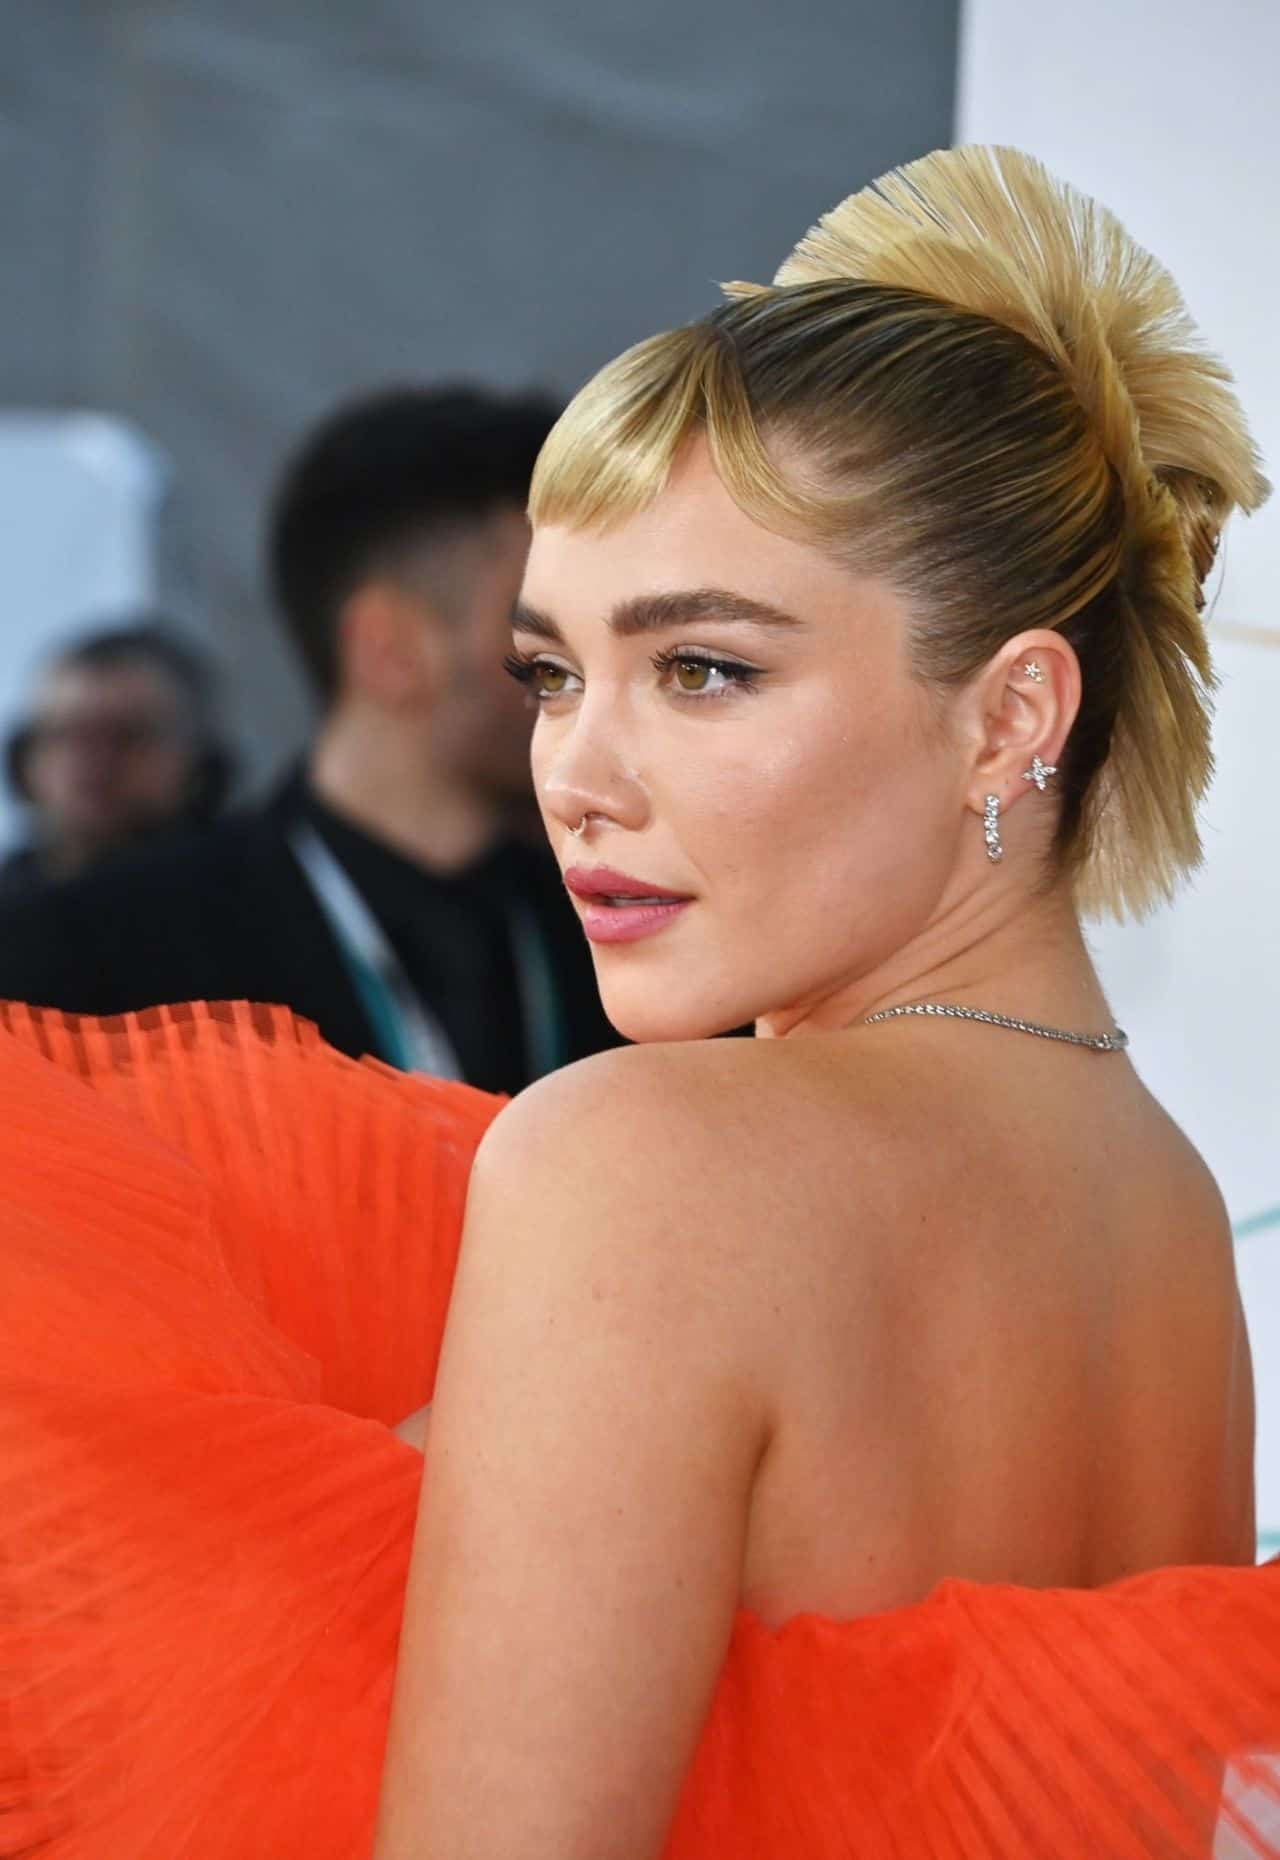 Florence Pugh in the Orange Gown at EE BAFTA Film Awards 2023 in London